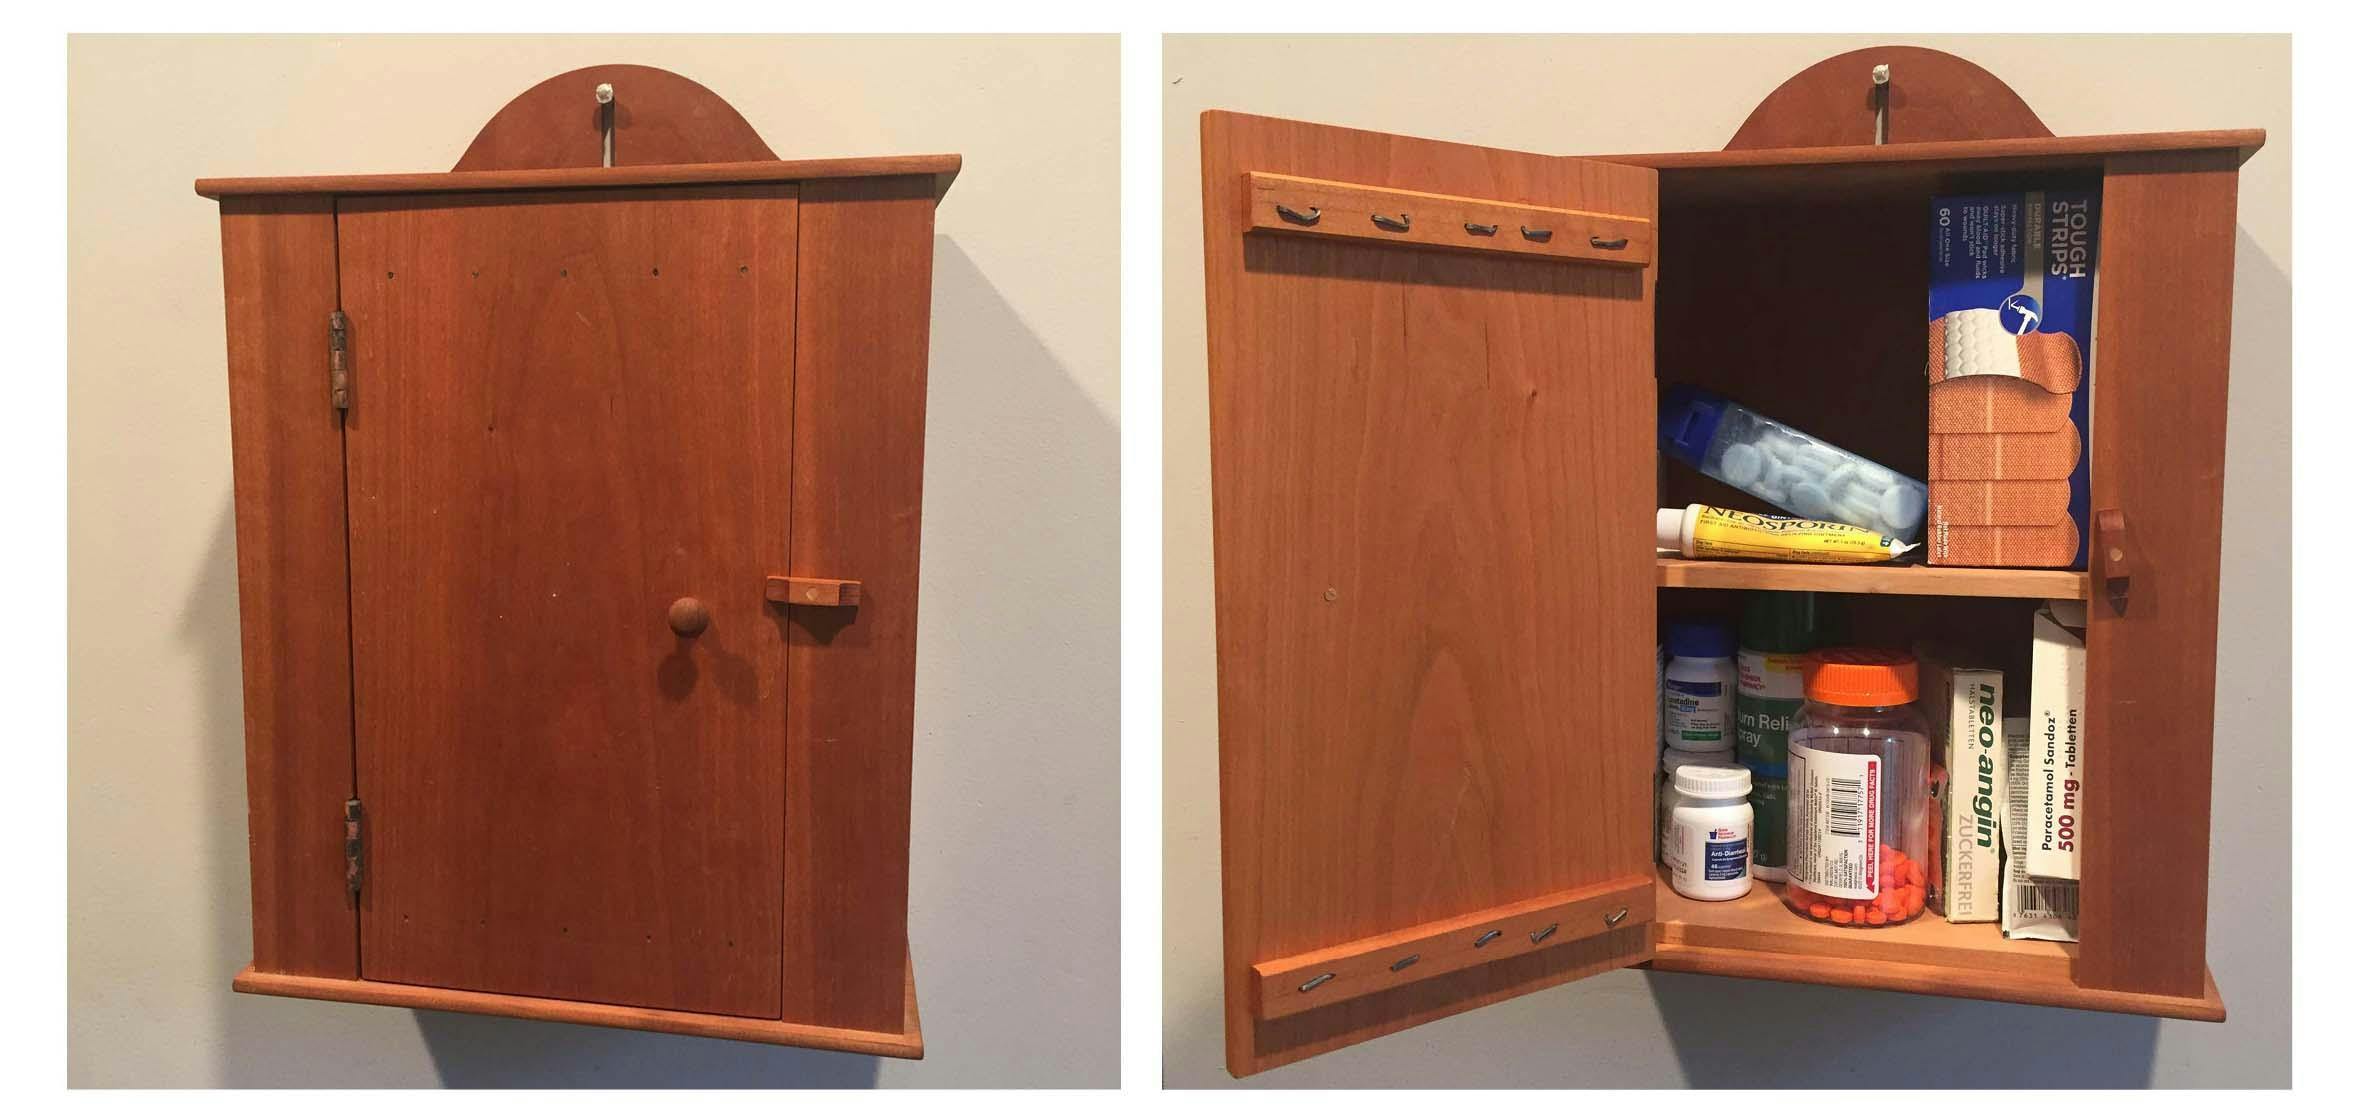 Build A Shaker Hanging Cabinet With Megan Fitzpatrick 16 Mar 2019